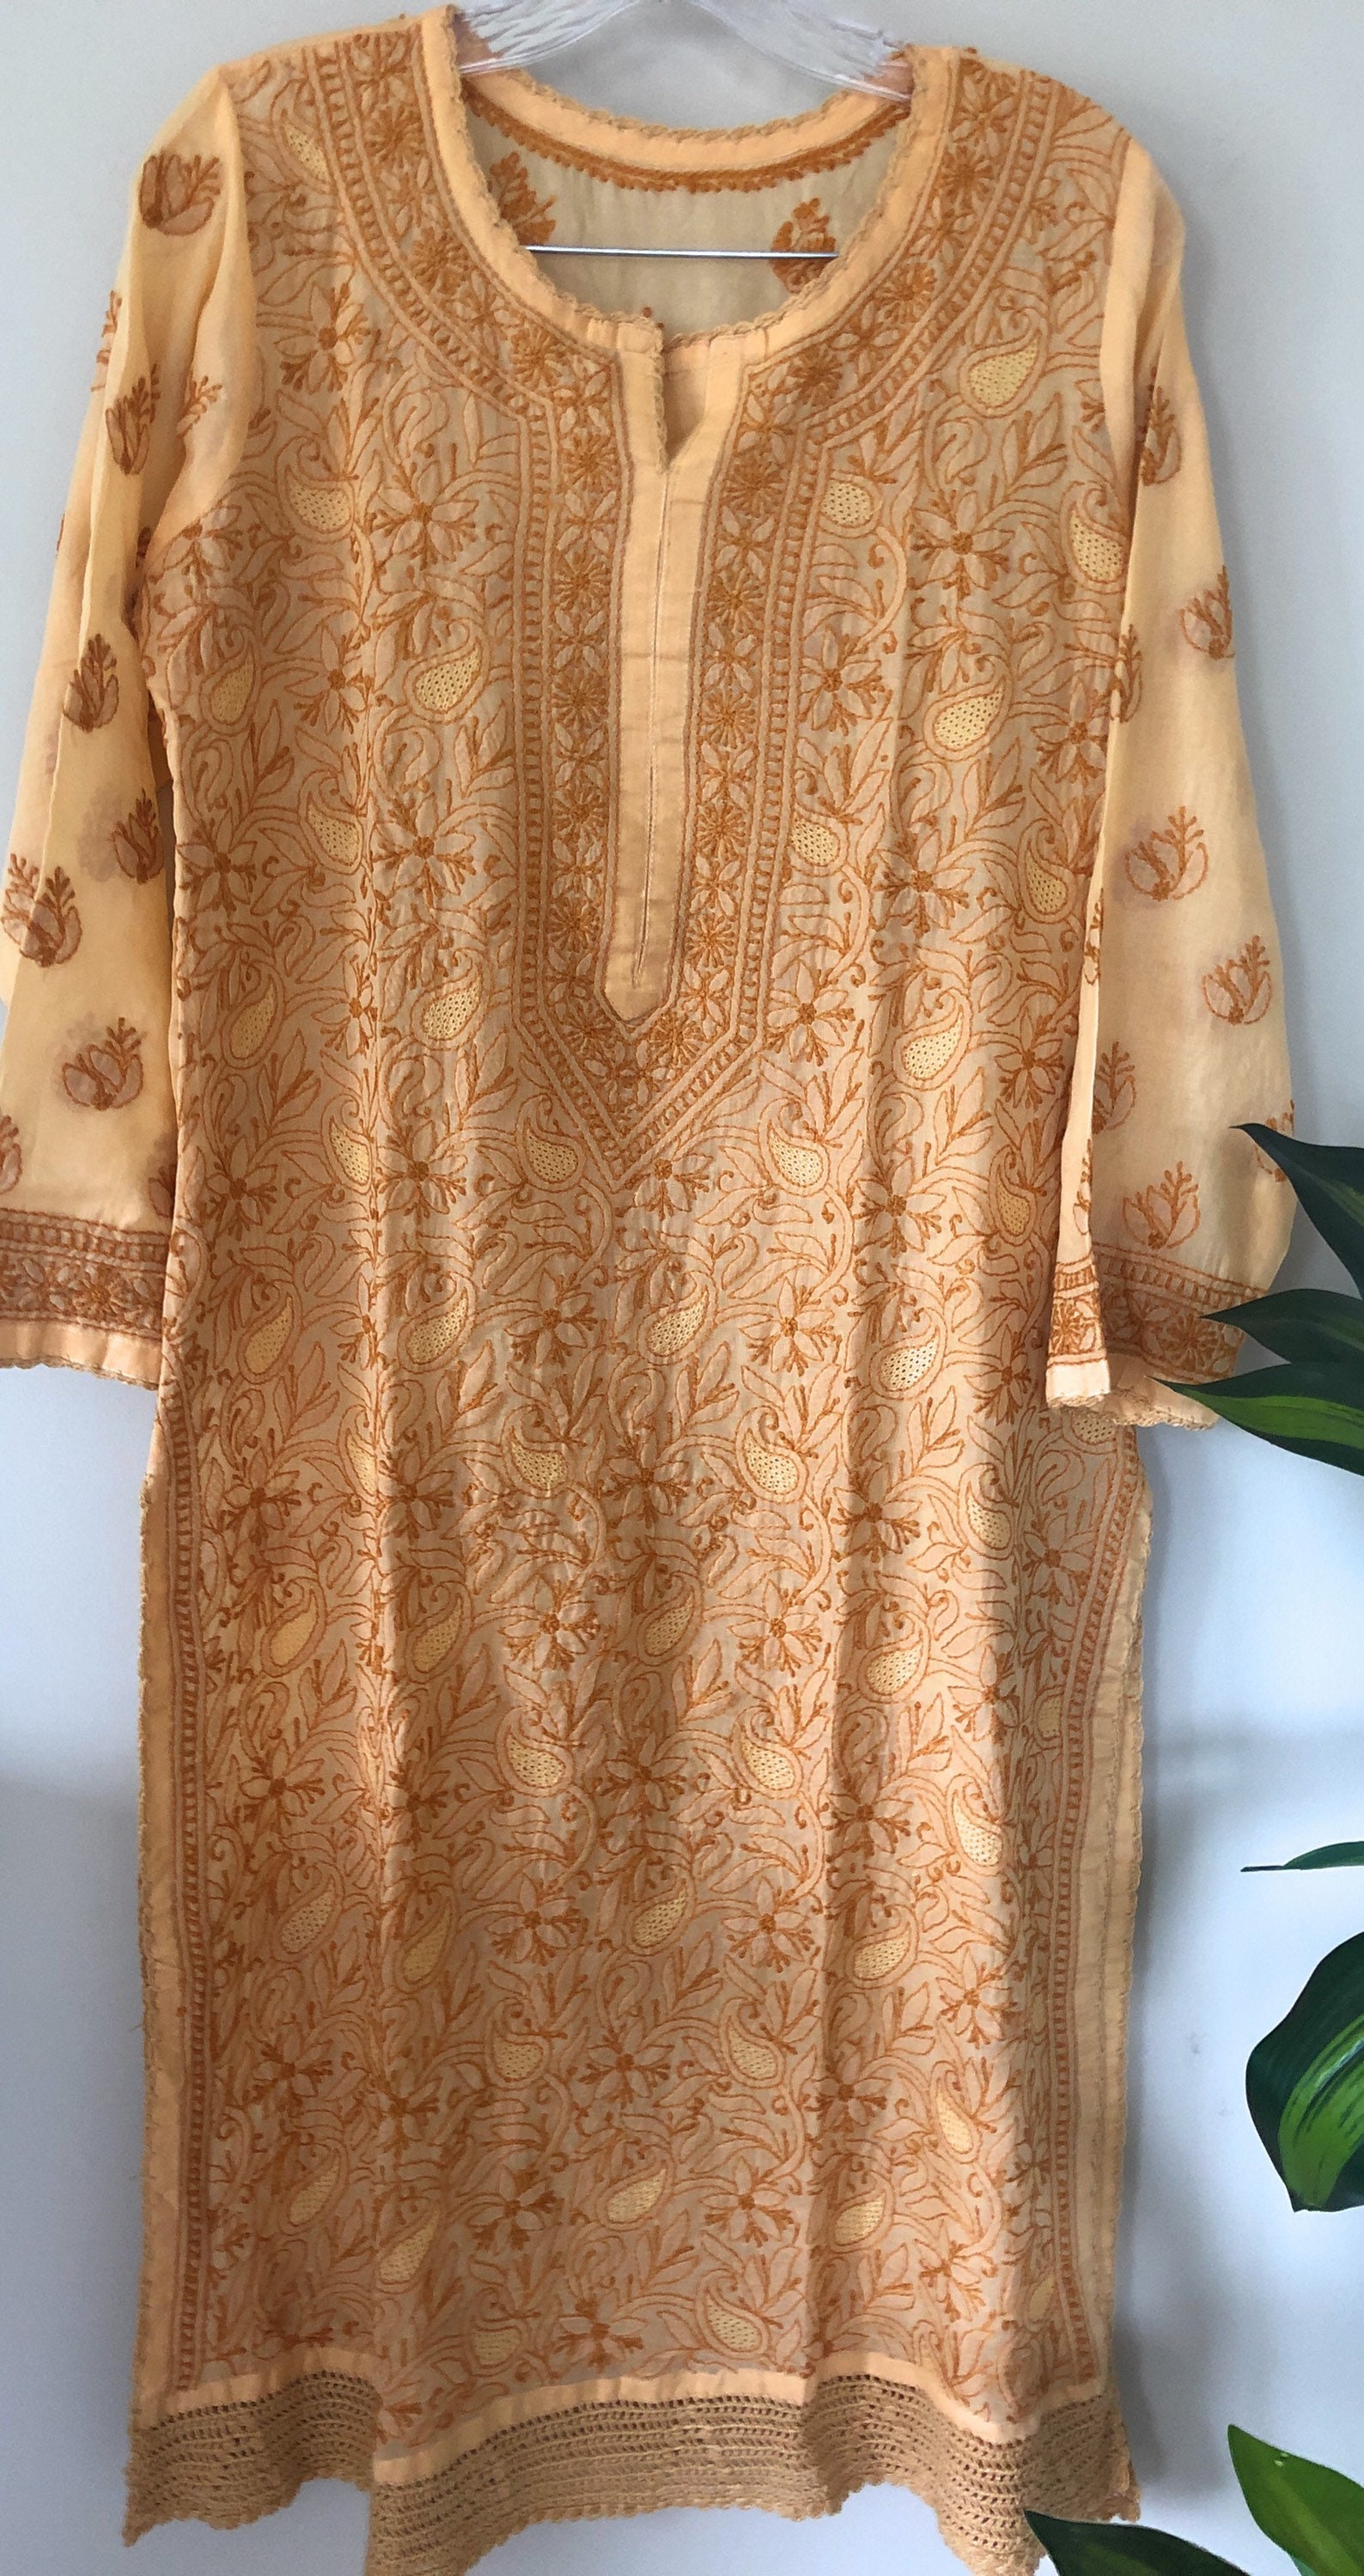 Lucknow Chikankari Soft Cotton Kurta/ Liner Included/FREE SHIPPING in US